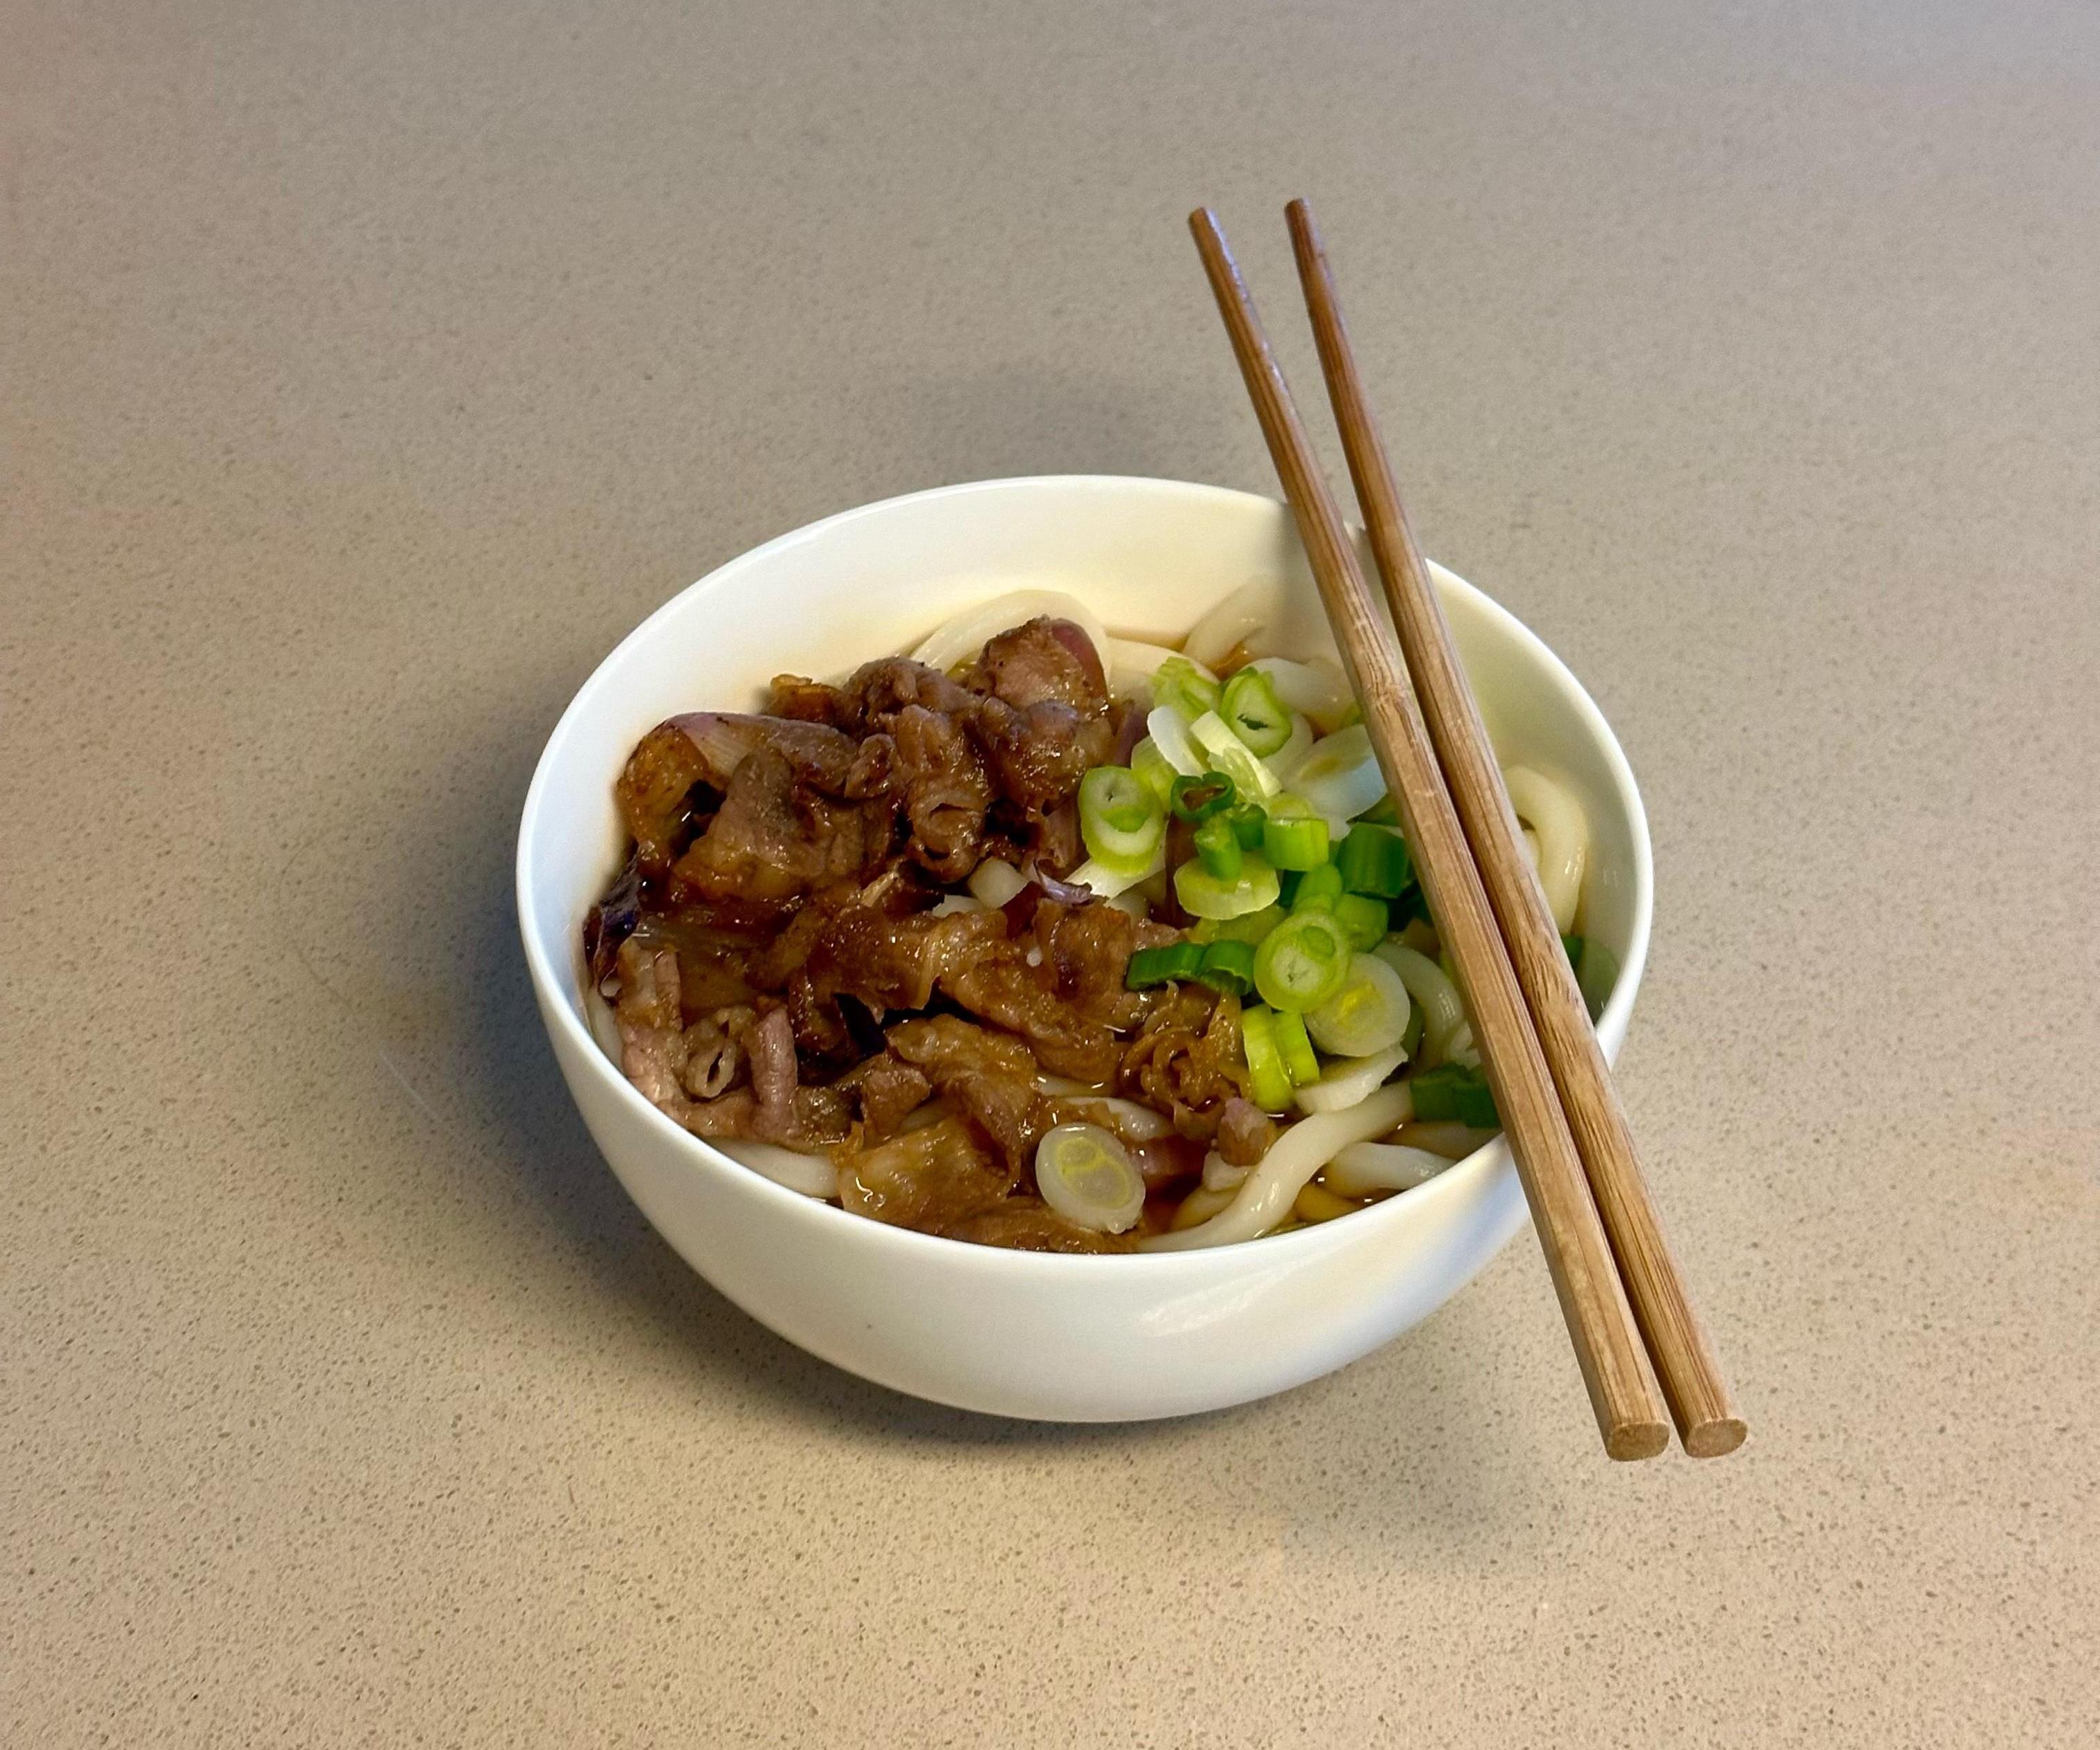 Mastering Homemade Beef or Niku Udon: Crafting Comfort in Every Bowl